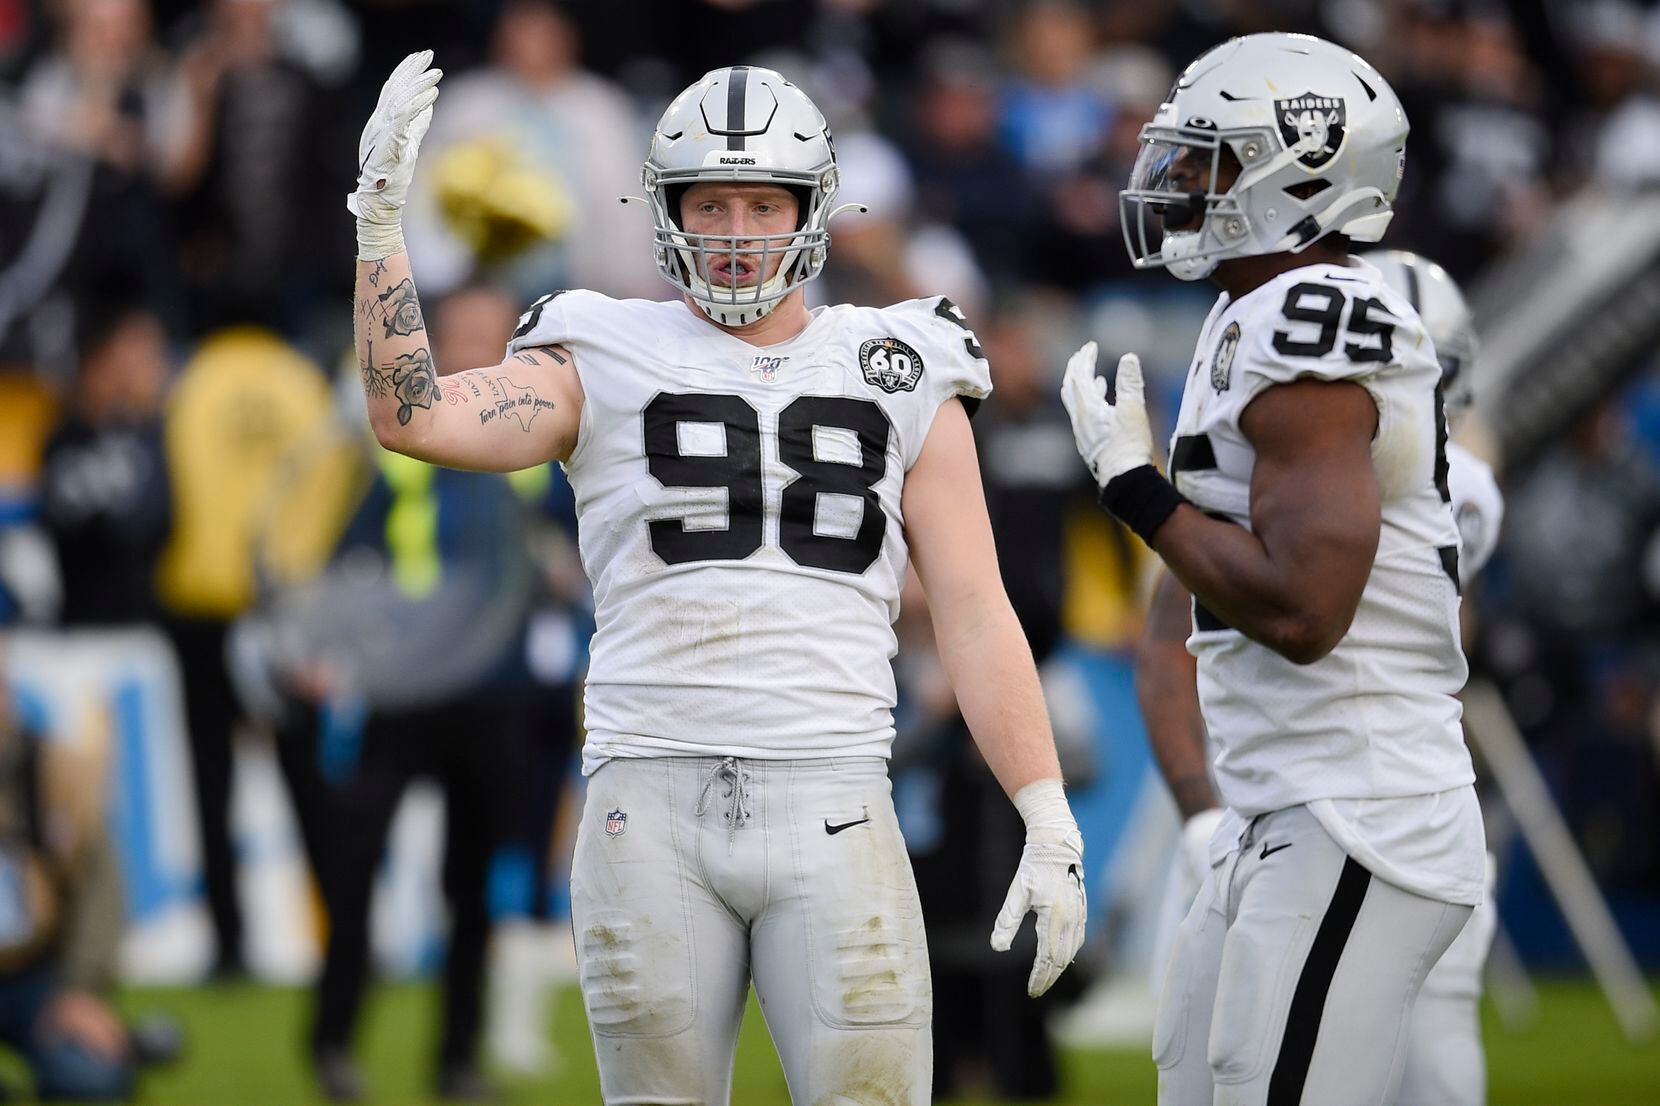 FILE - Raiders defensive end Maxx Crosby is pictured during the second half of a game against the Chargers in Carson, Calif., on Sunday, Dec. 22, 2019. (AP Photo/Kelvin Kuo)